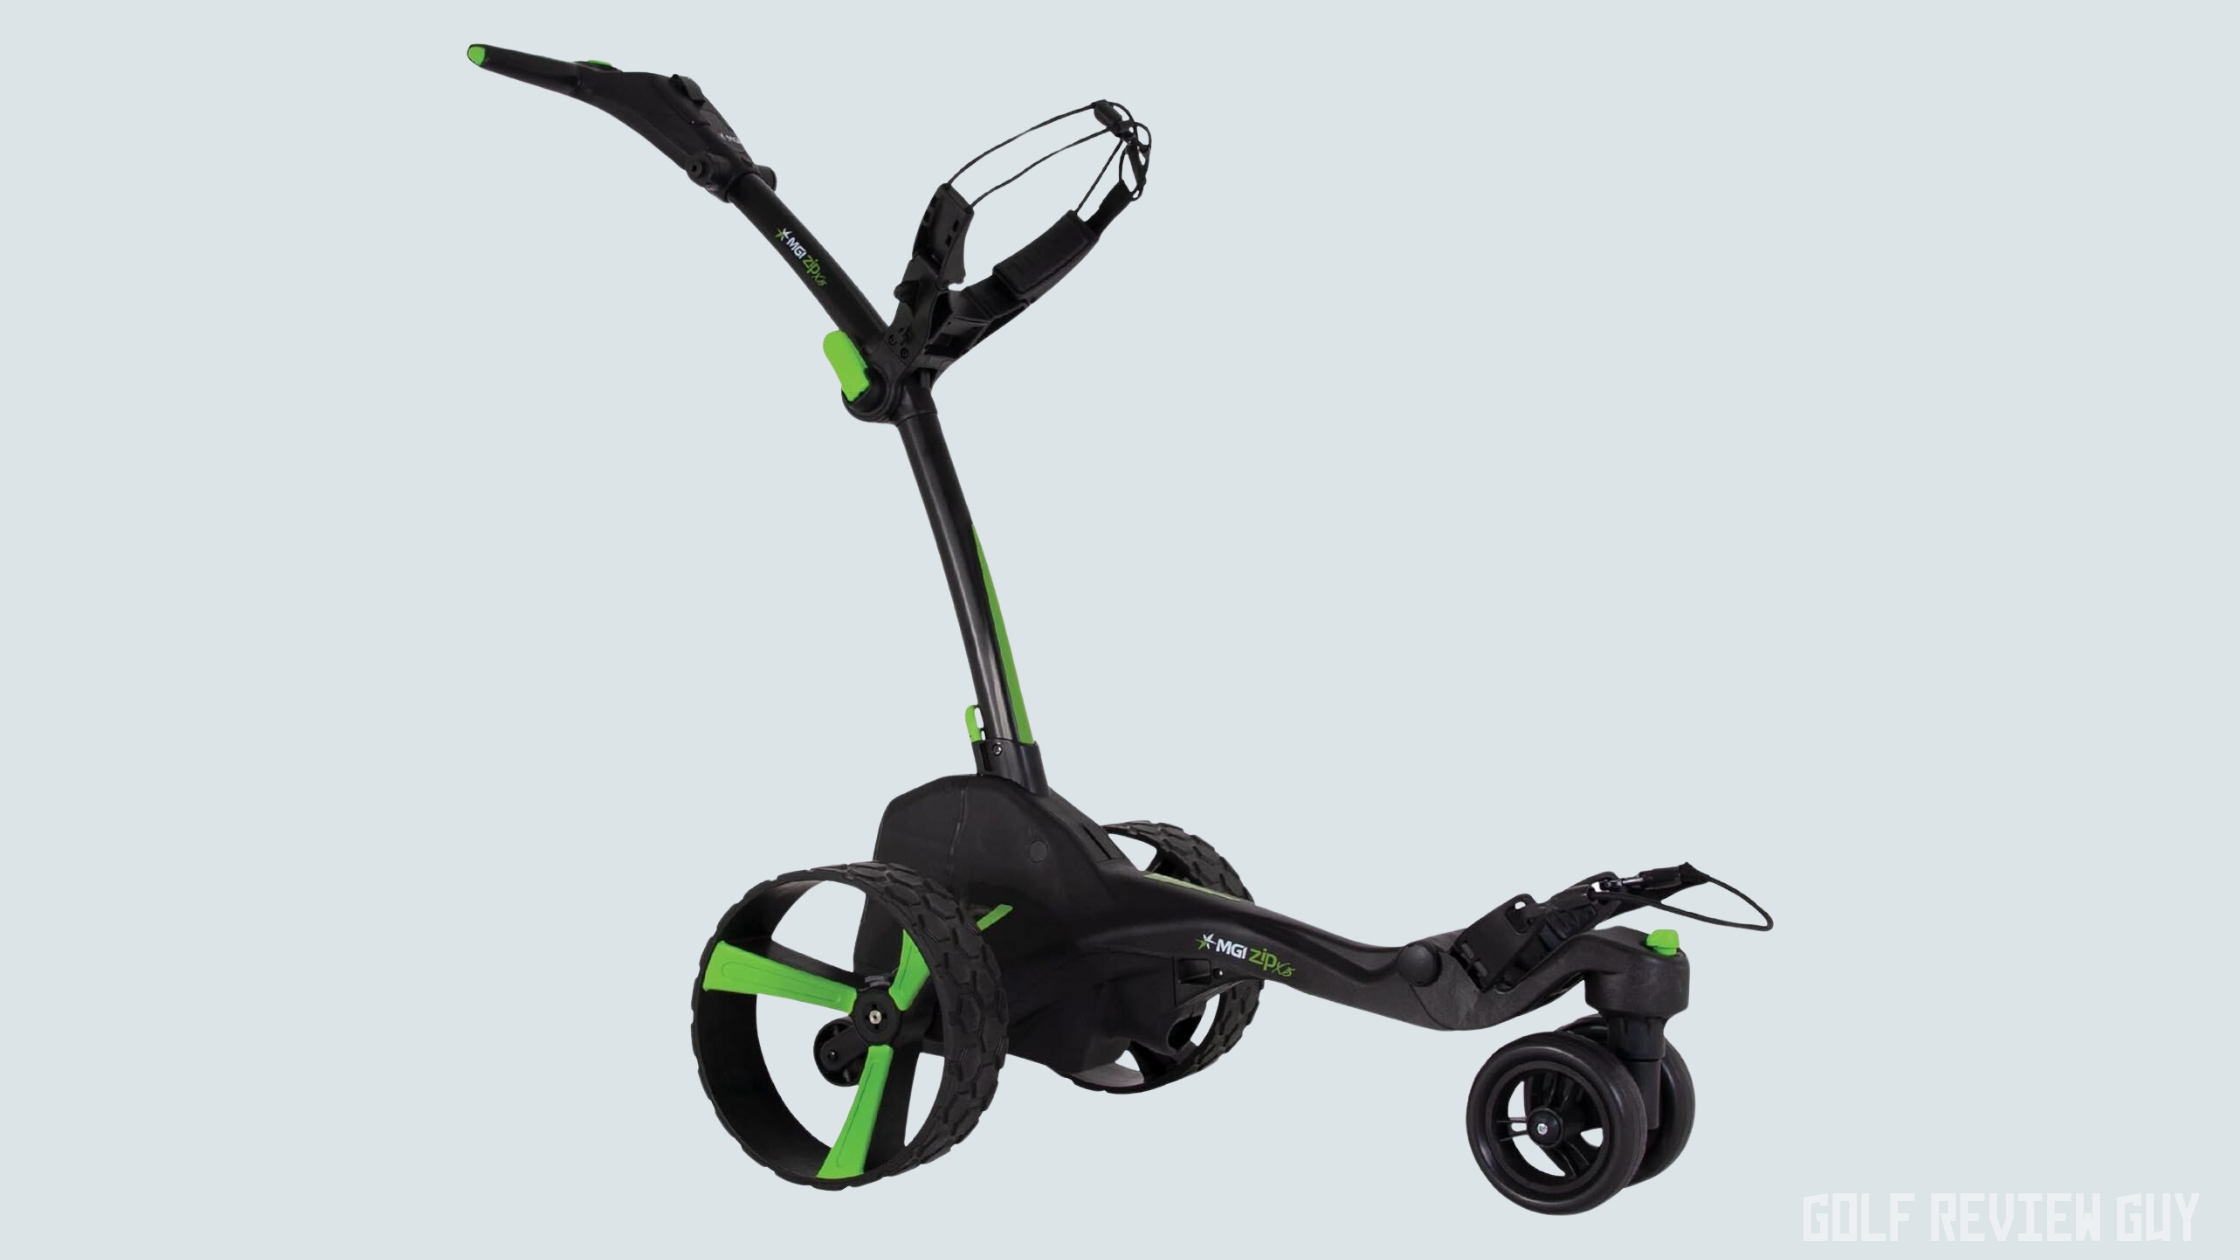 MGI Zip X5 Electric Golf Cart Review - Golf Review Guy